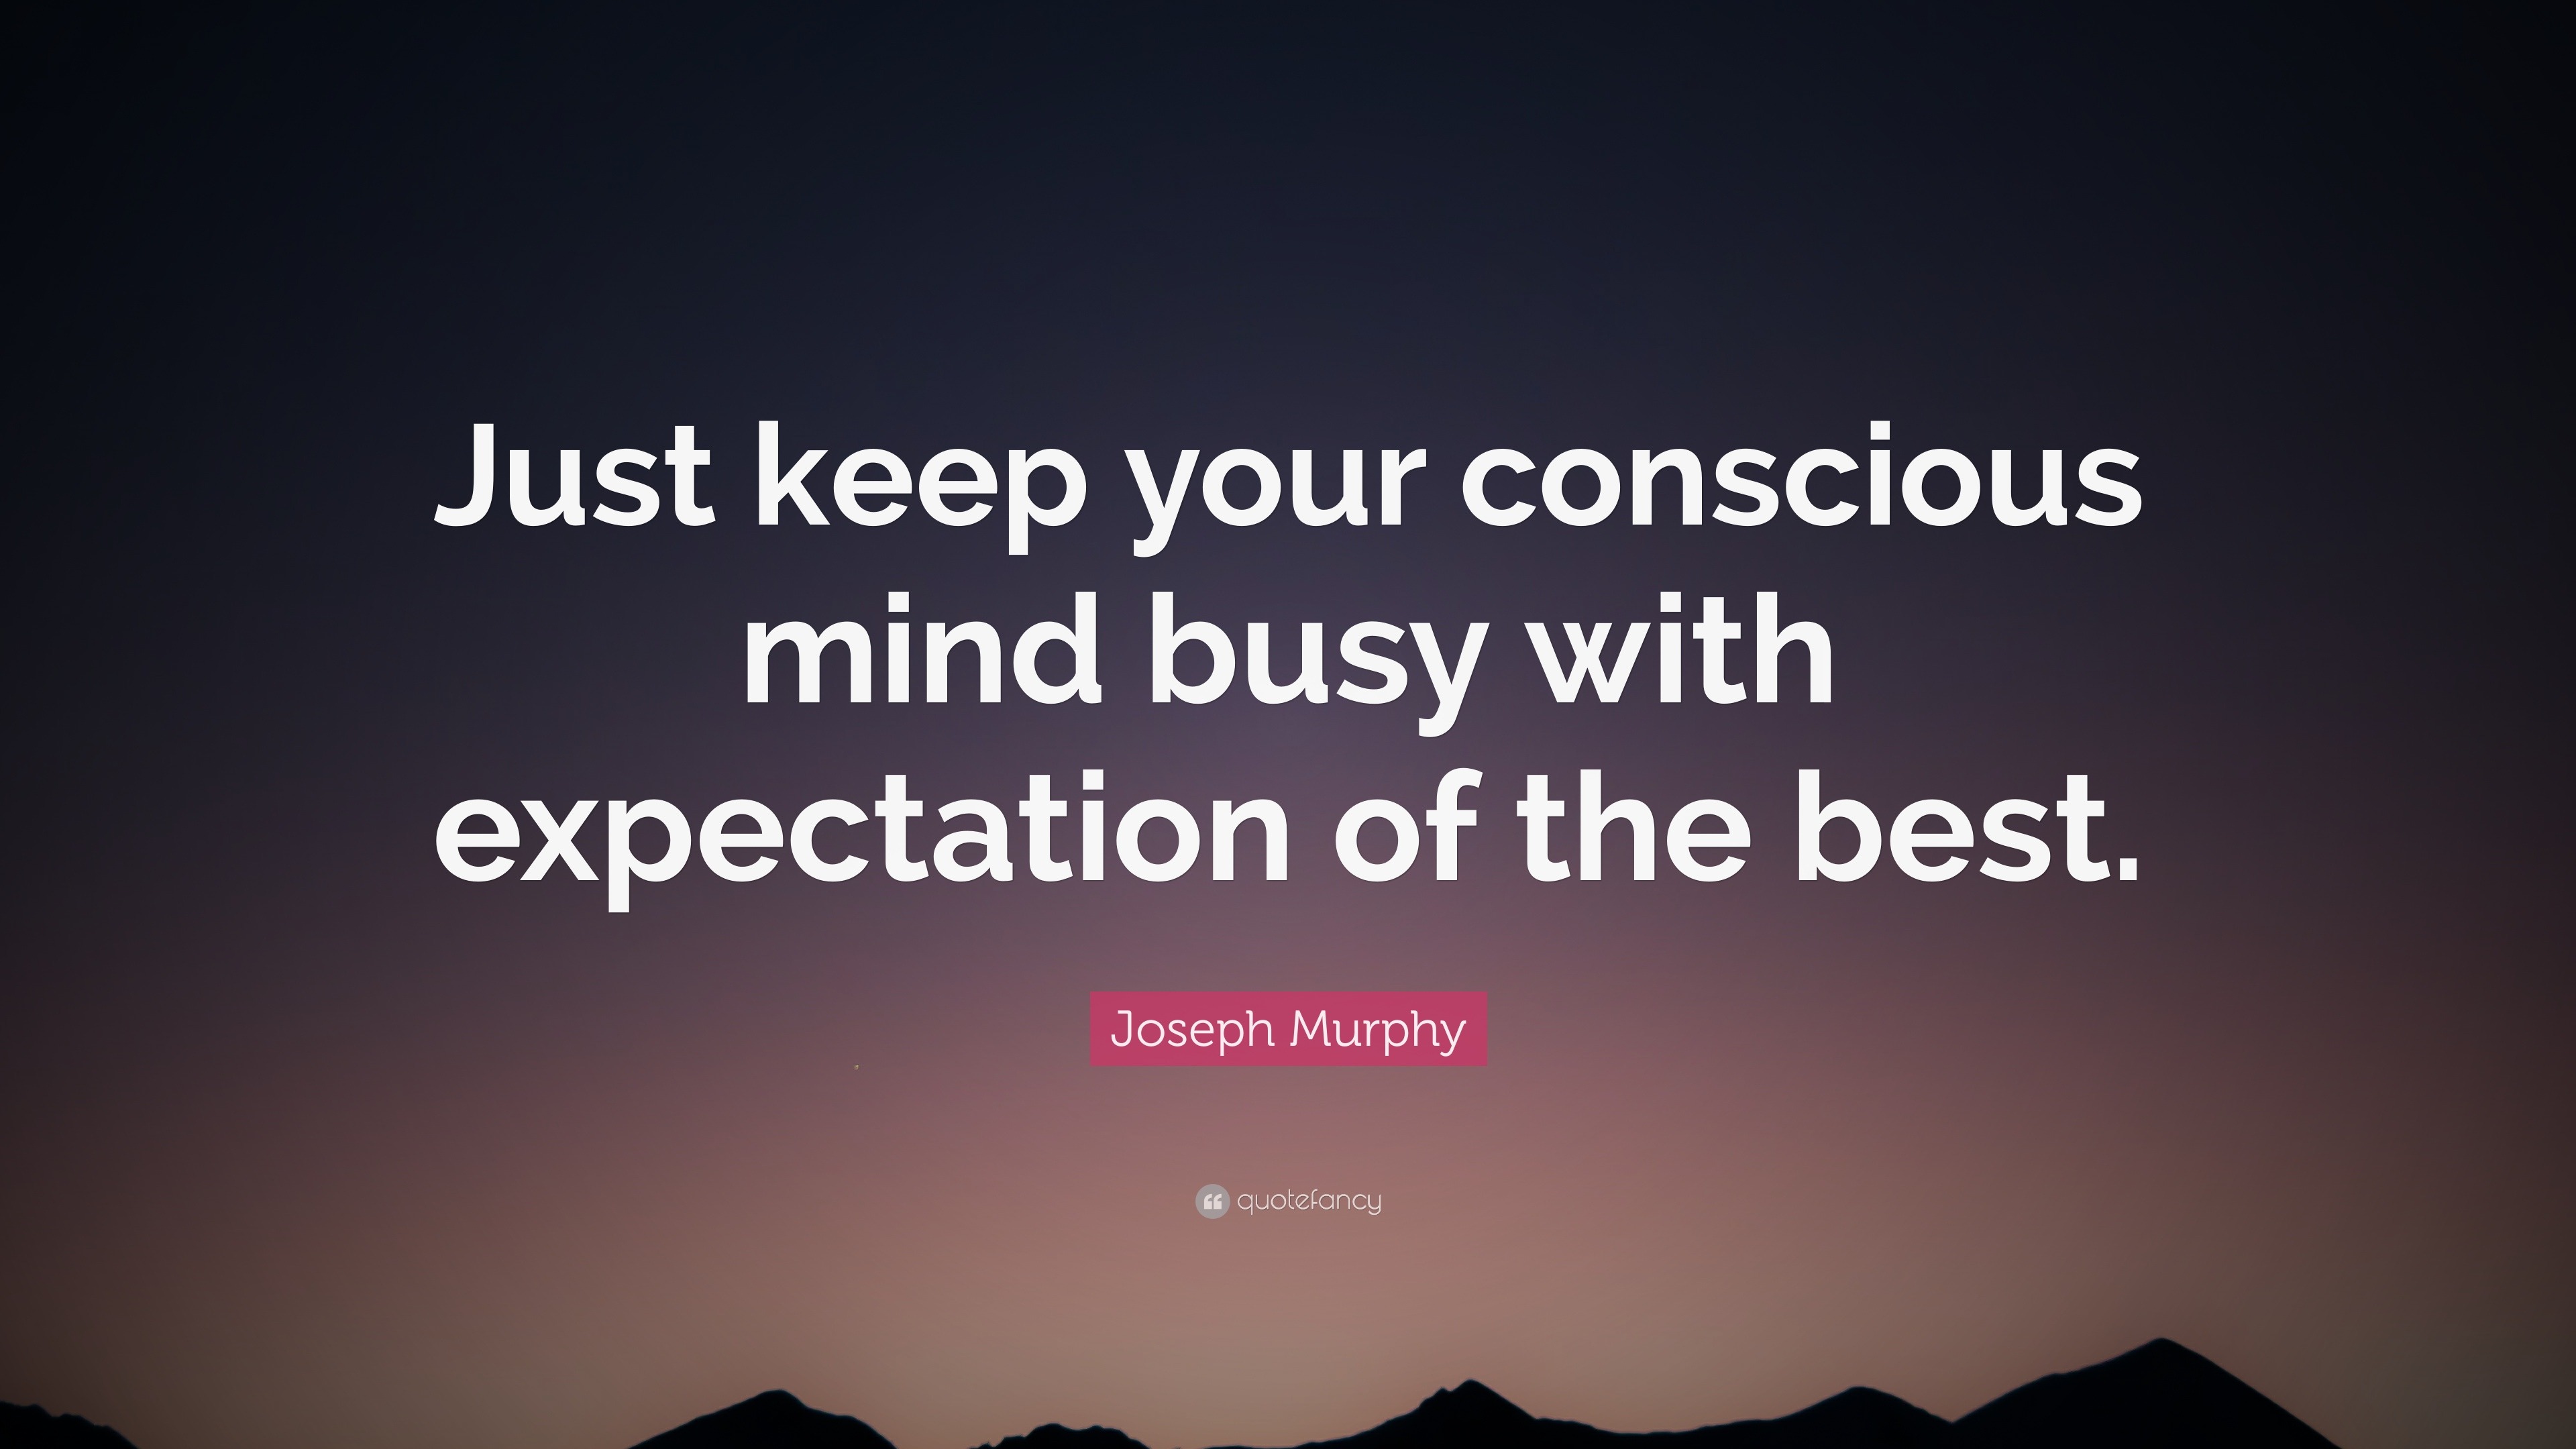 Joseph Murphy Quote Just Keep Your Conscious Mind Busy With Expectation Of The Best